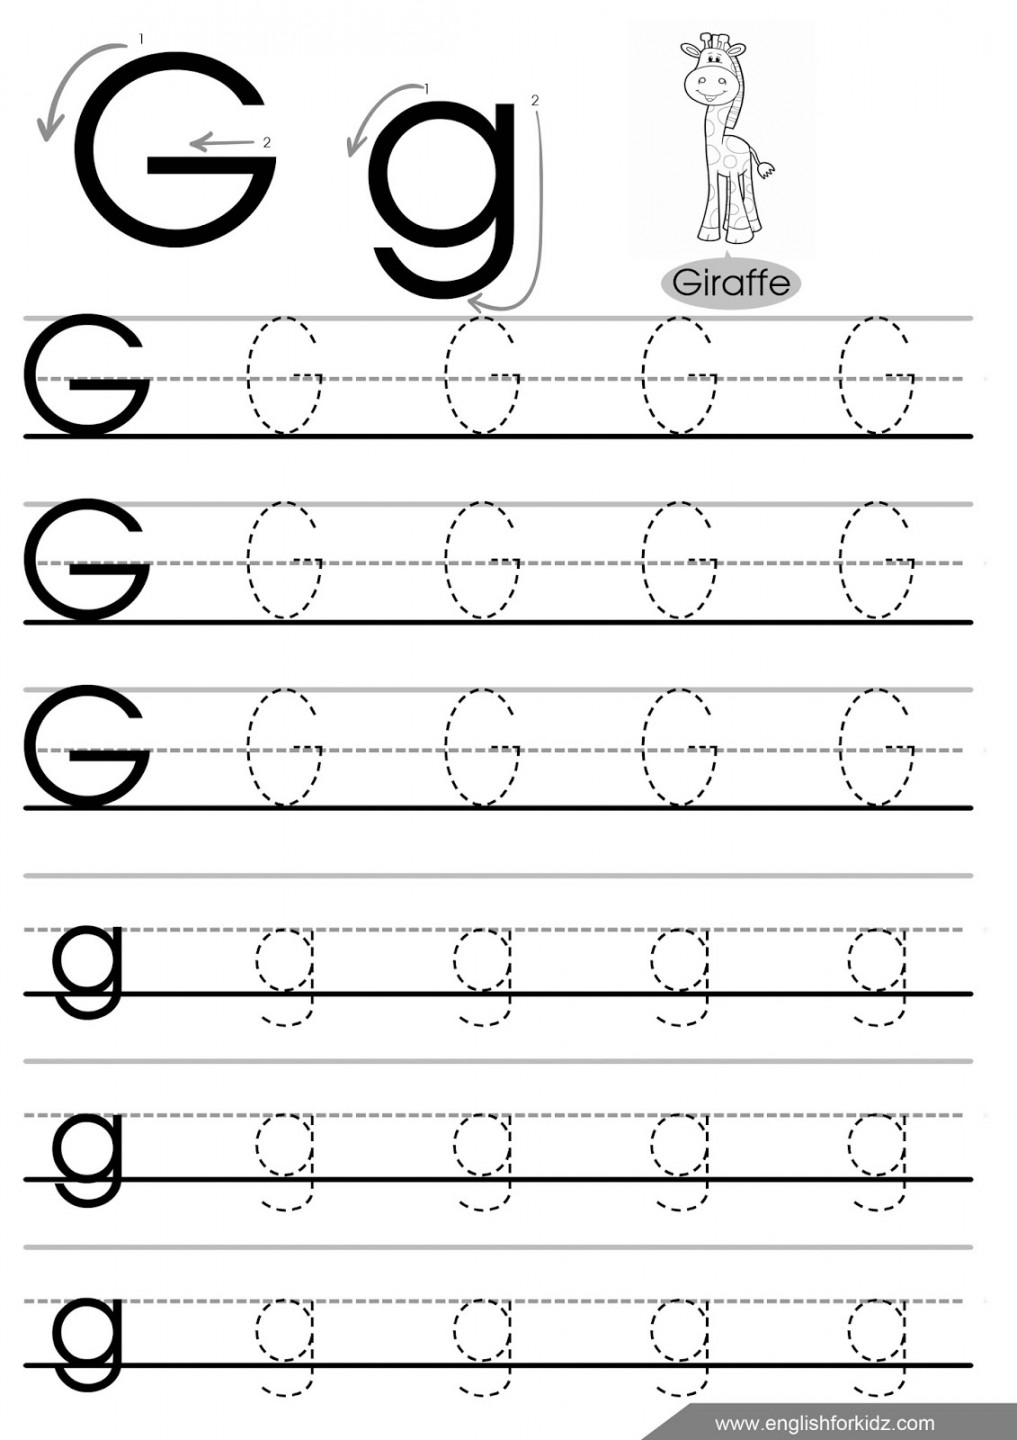 English for Kids Step by Step: Letter G Worksheets, Flash Cards